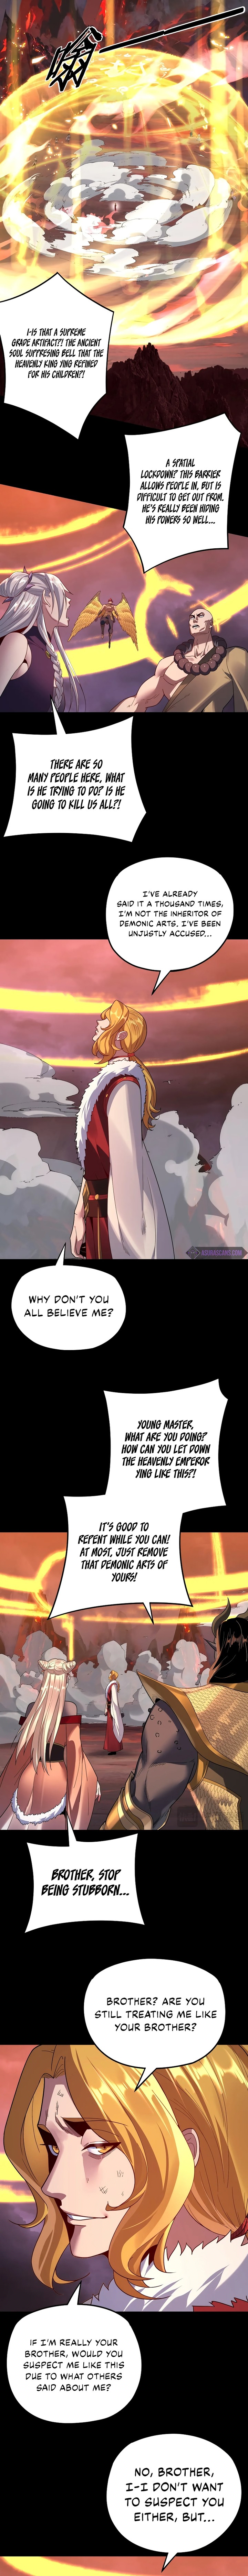 Me The Heavenly Destined Villain Chapter 123 Page 4